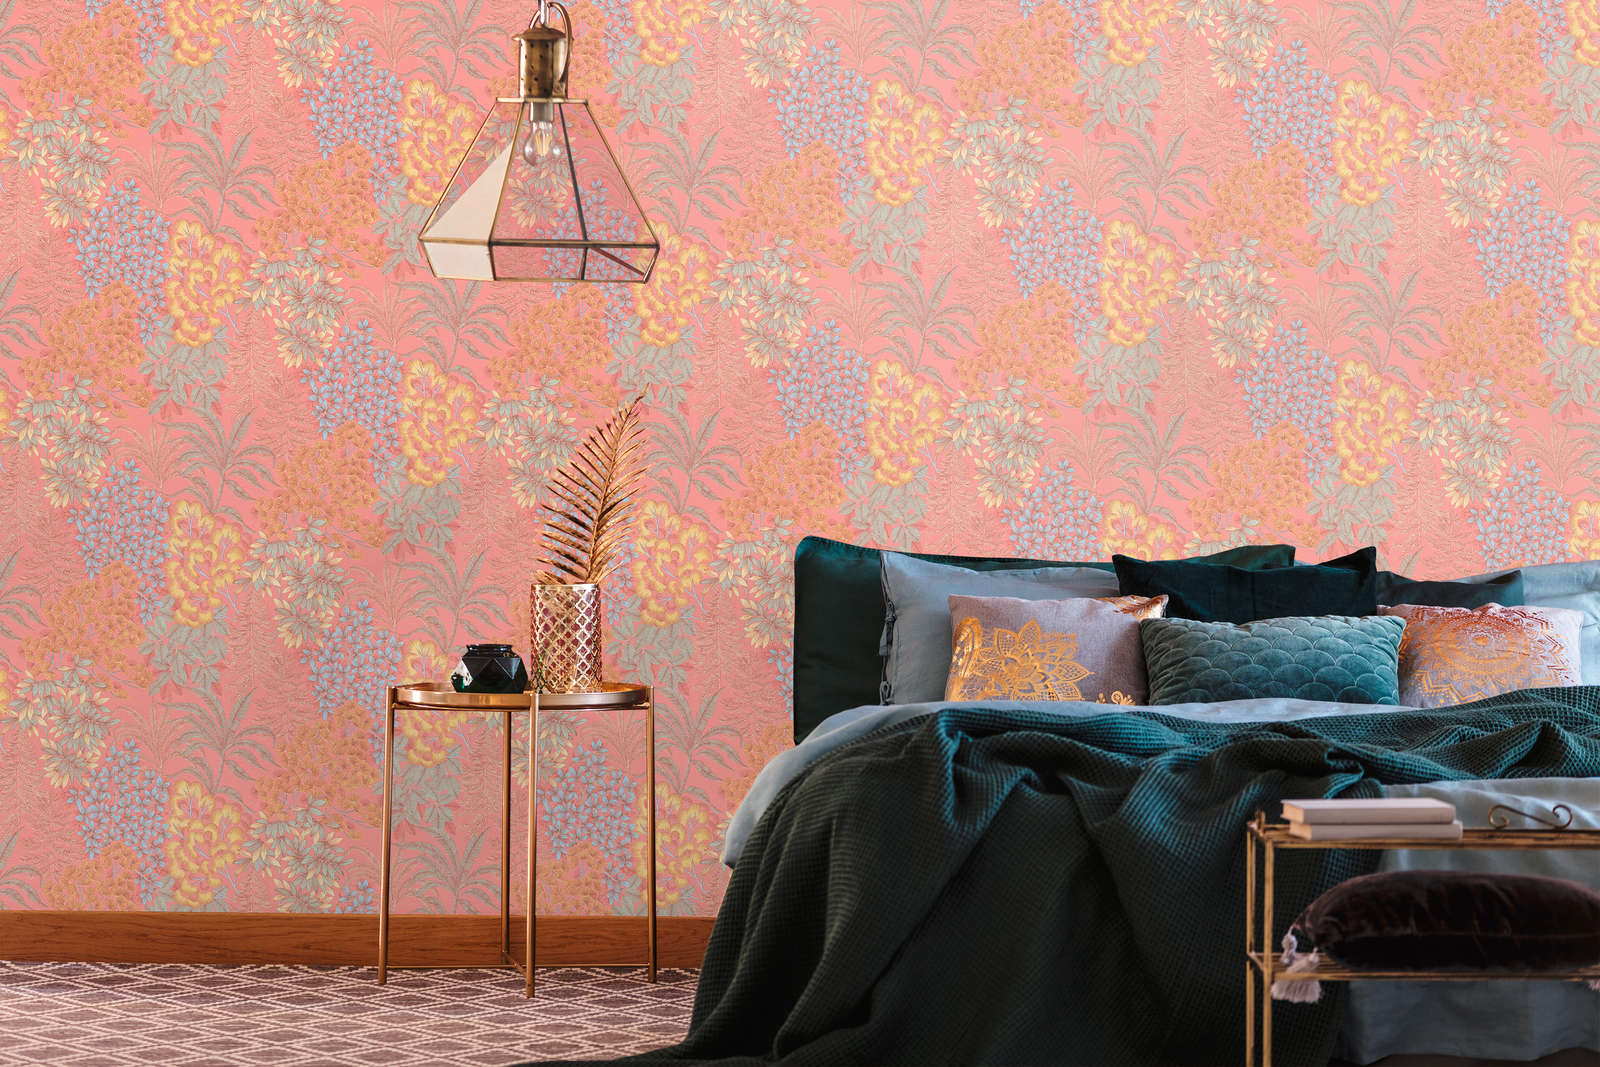             Playful floral wallpaper in a subtle colour - pink, blue, yellow
        